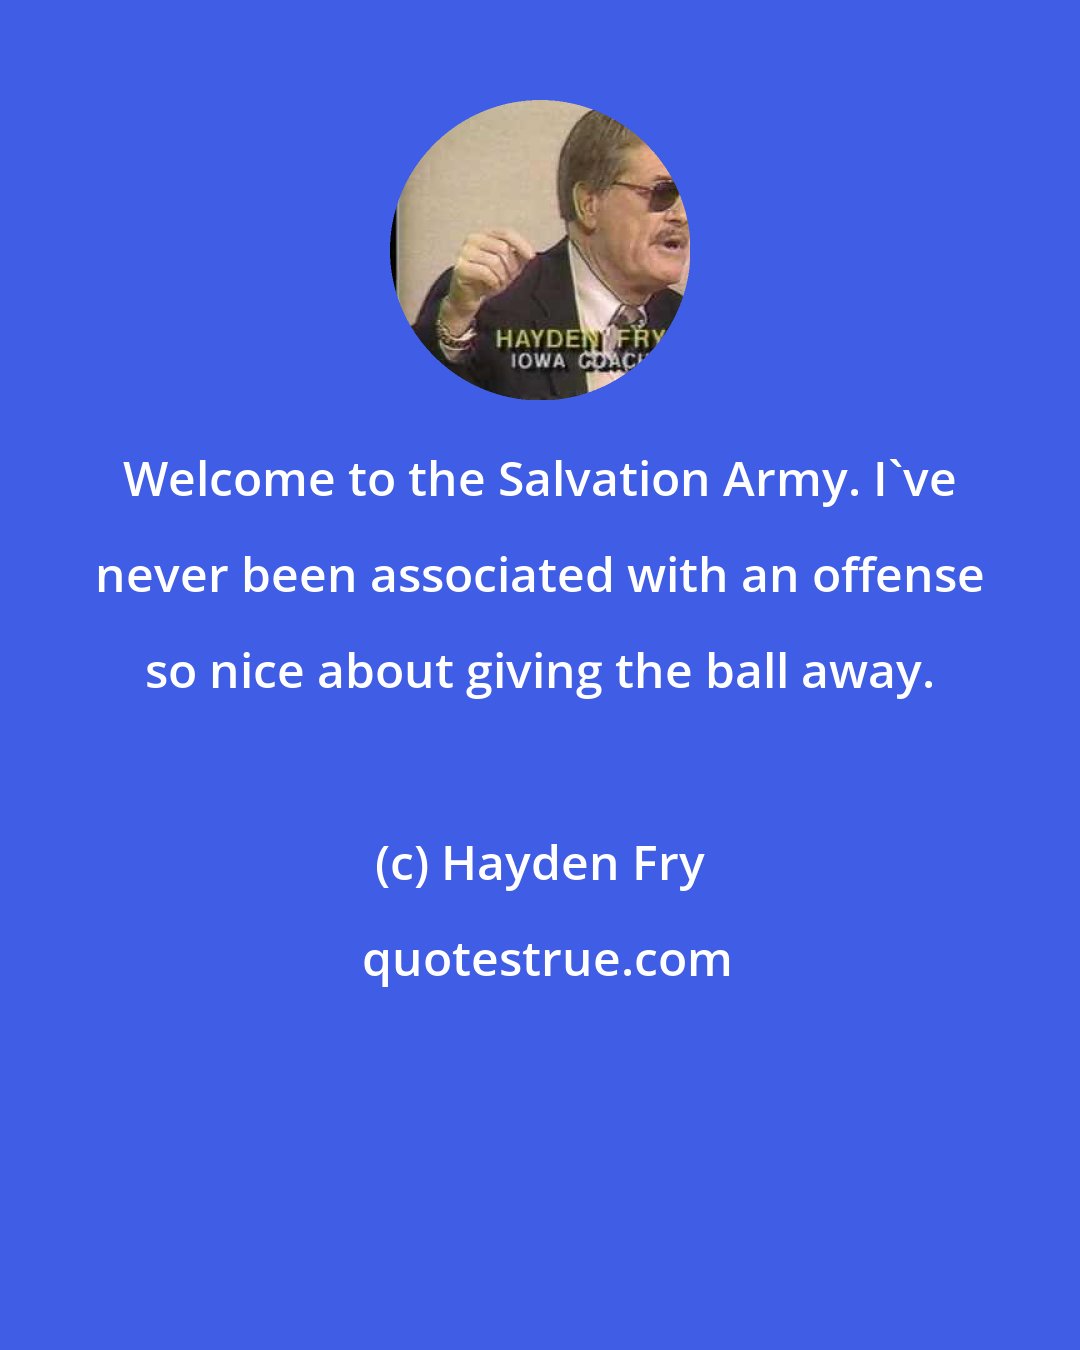 Hayden Fry: Welcome to the Salvation Army. I've never been associated with an offense so nice about giving the ball away.